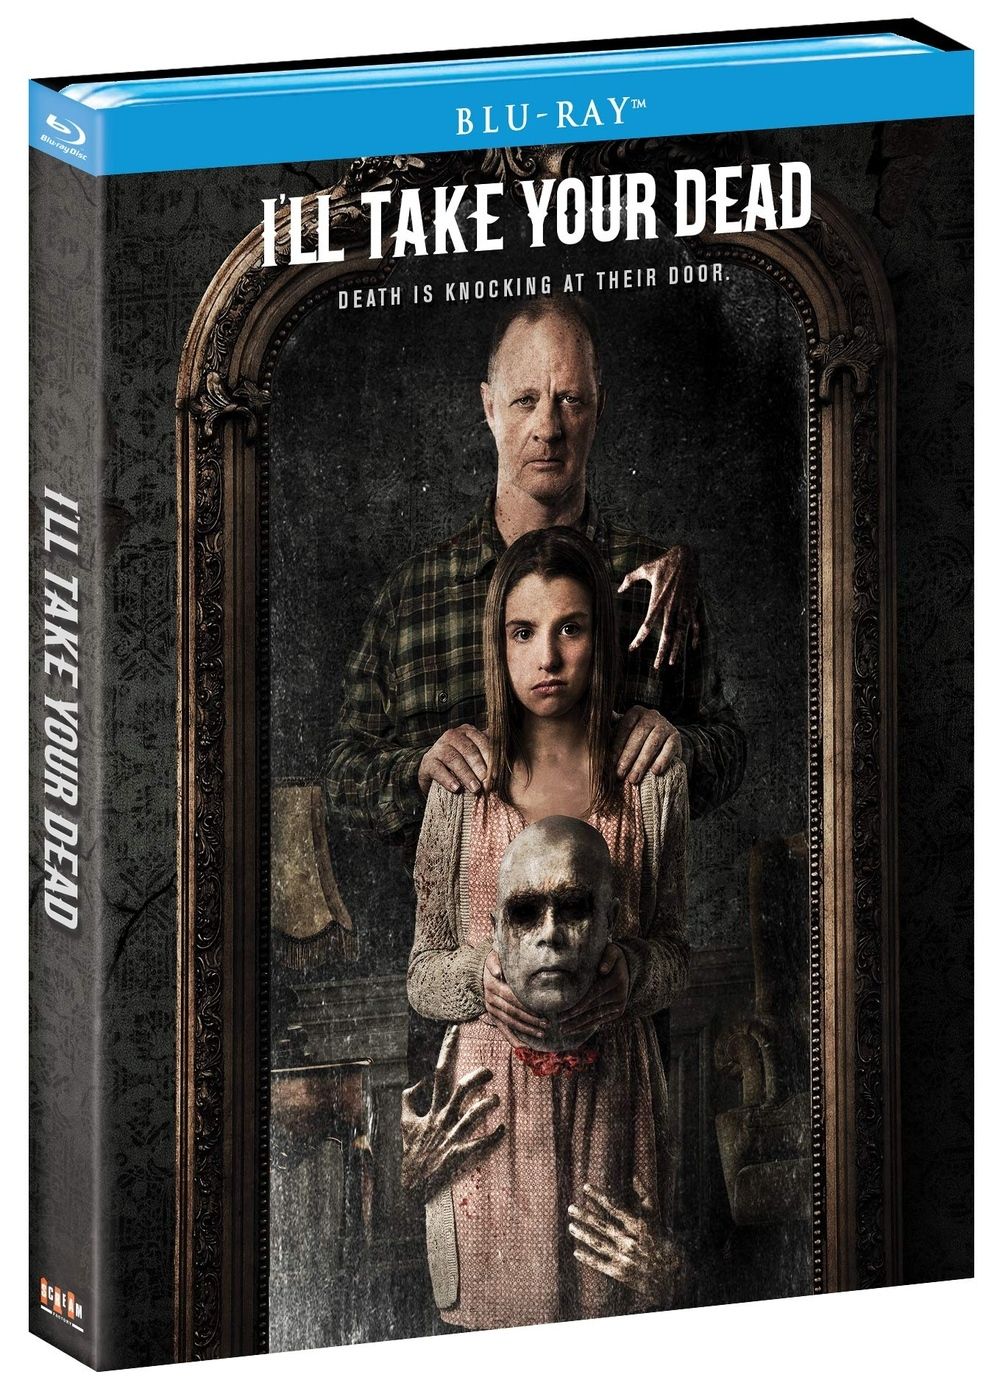 I'll Take Your Dead blu-ray cover art